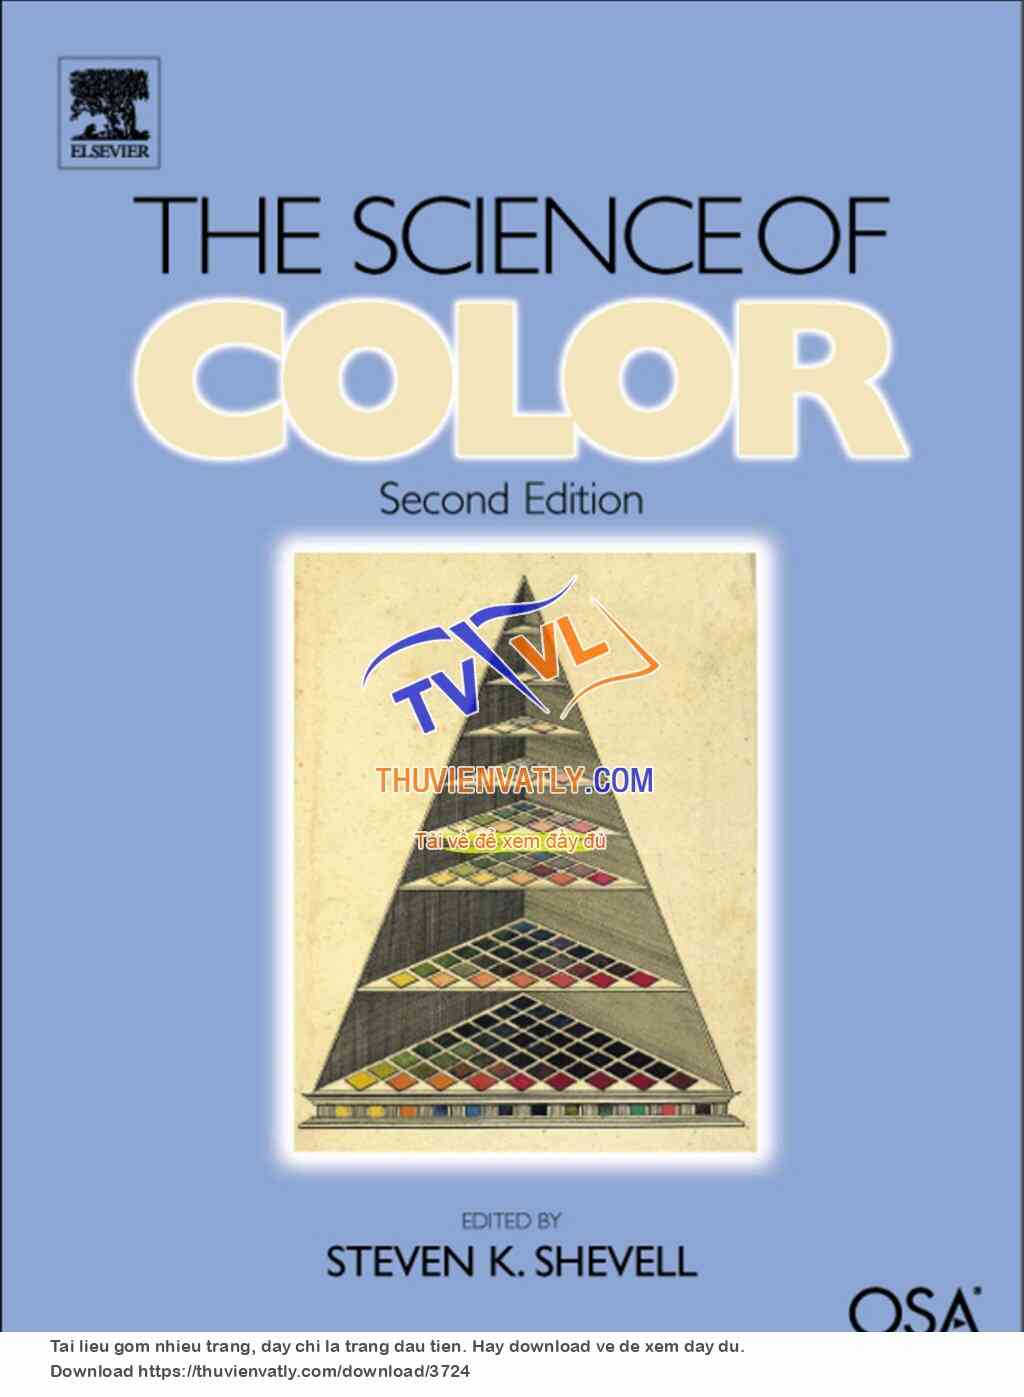 The Science of Color (Steven K. Shevell)